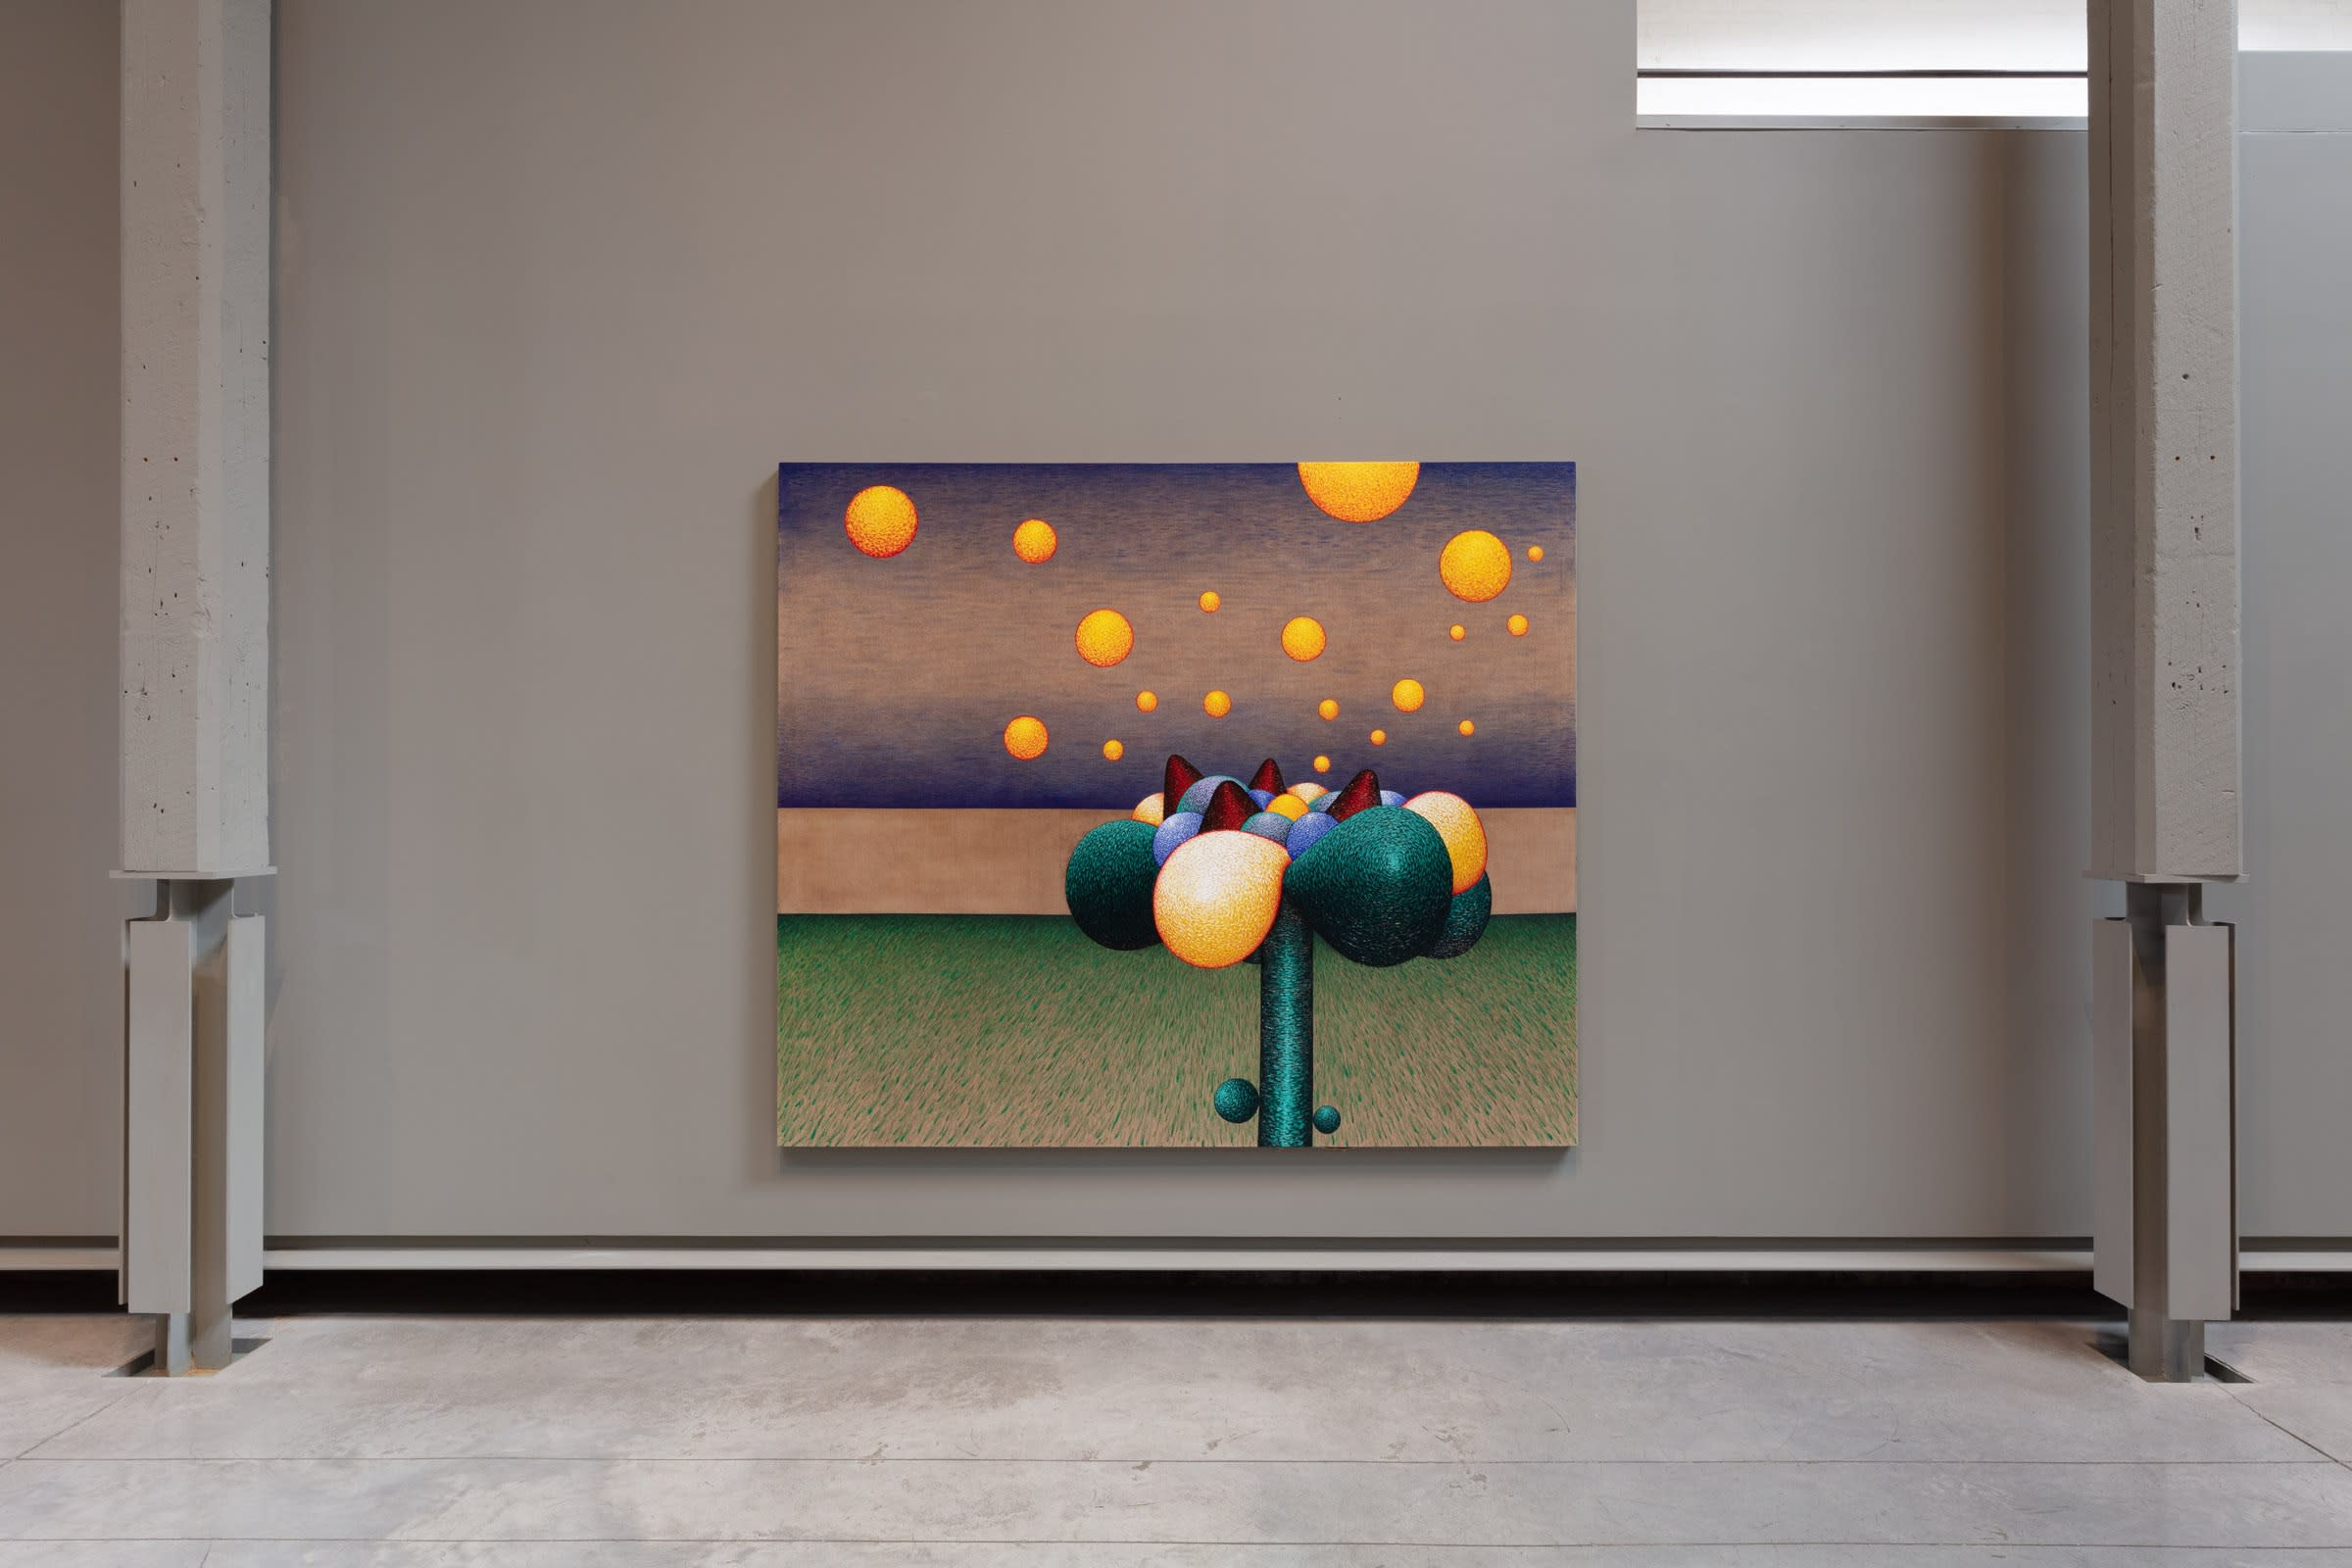 Christian Butterfield, Apology Flower #8 (across the bay), 2021, acrylic on linen, 84 x 72 in.